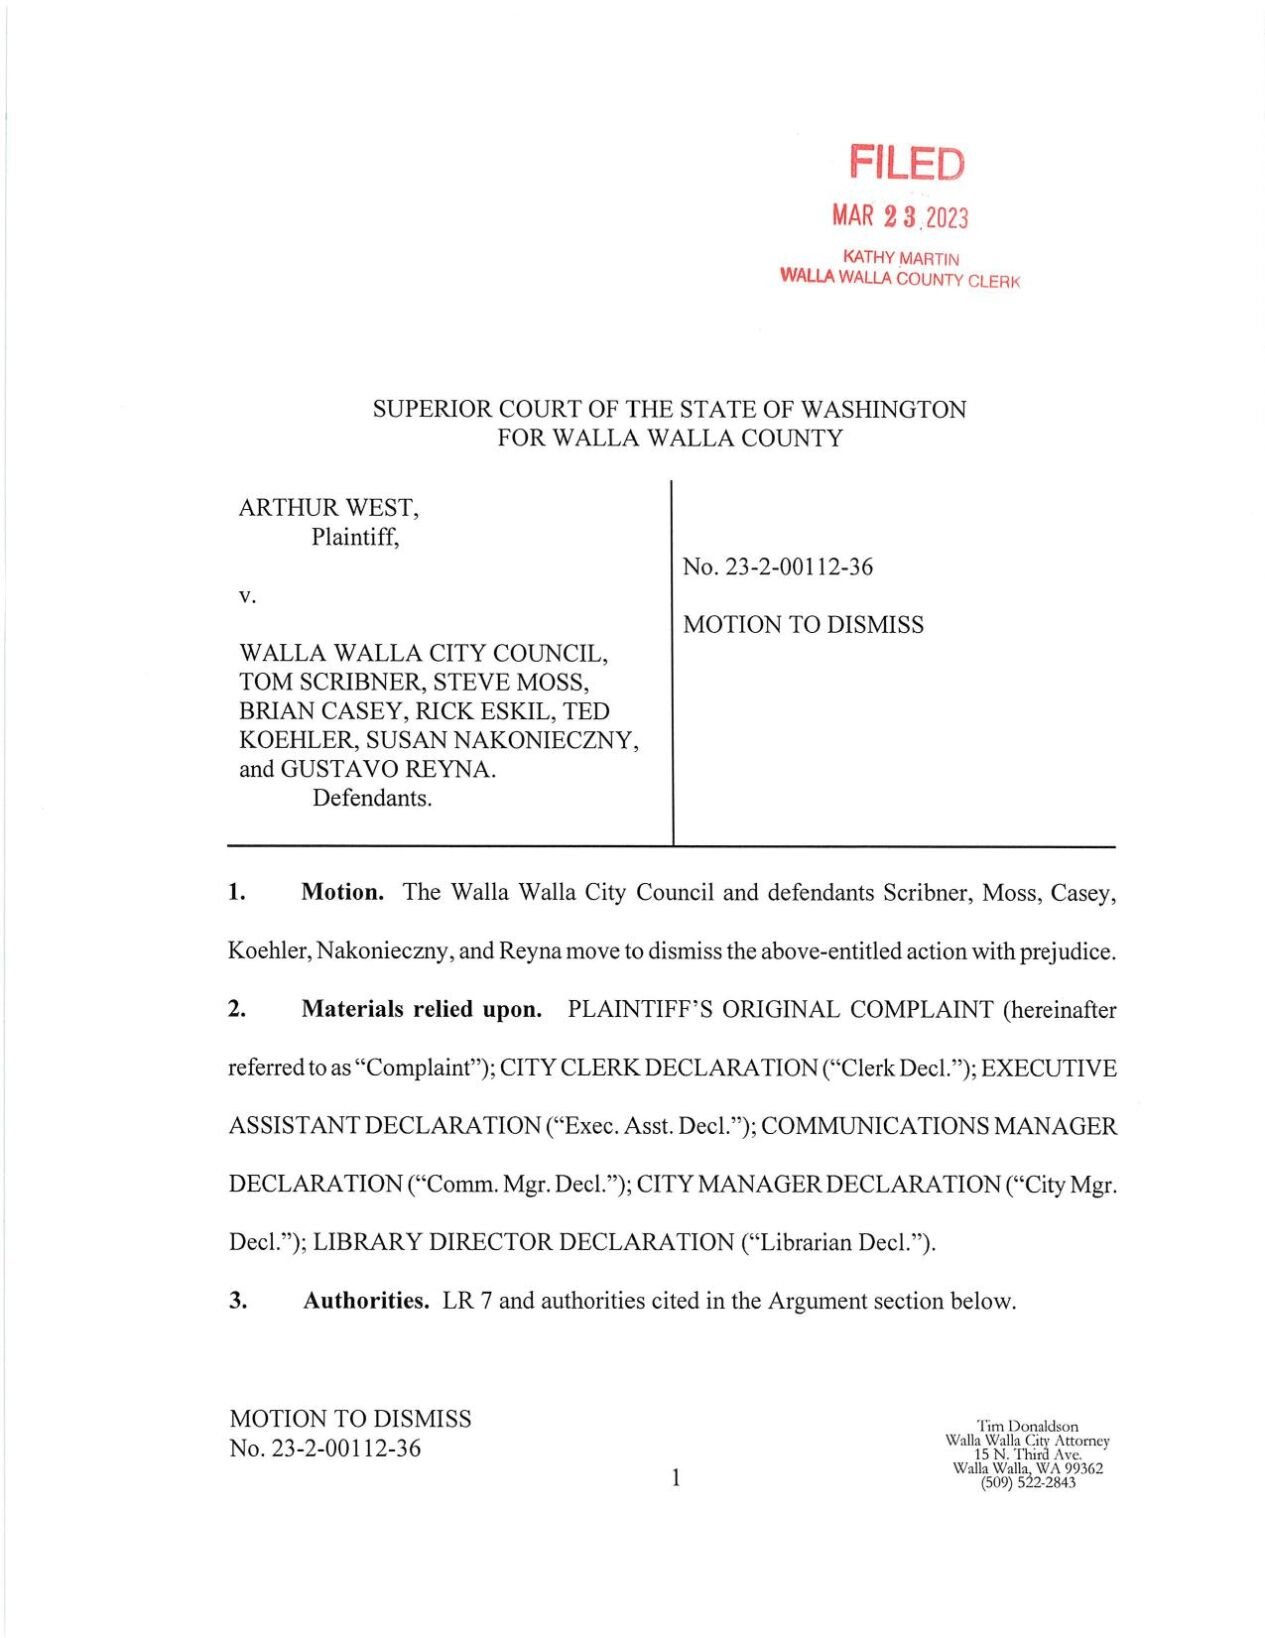 City's motion to dismiss